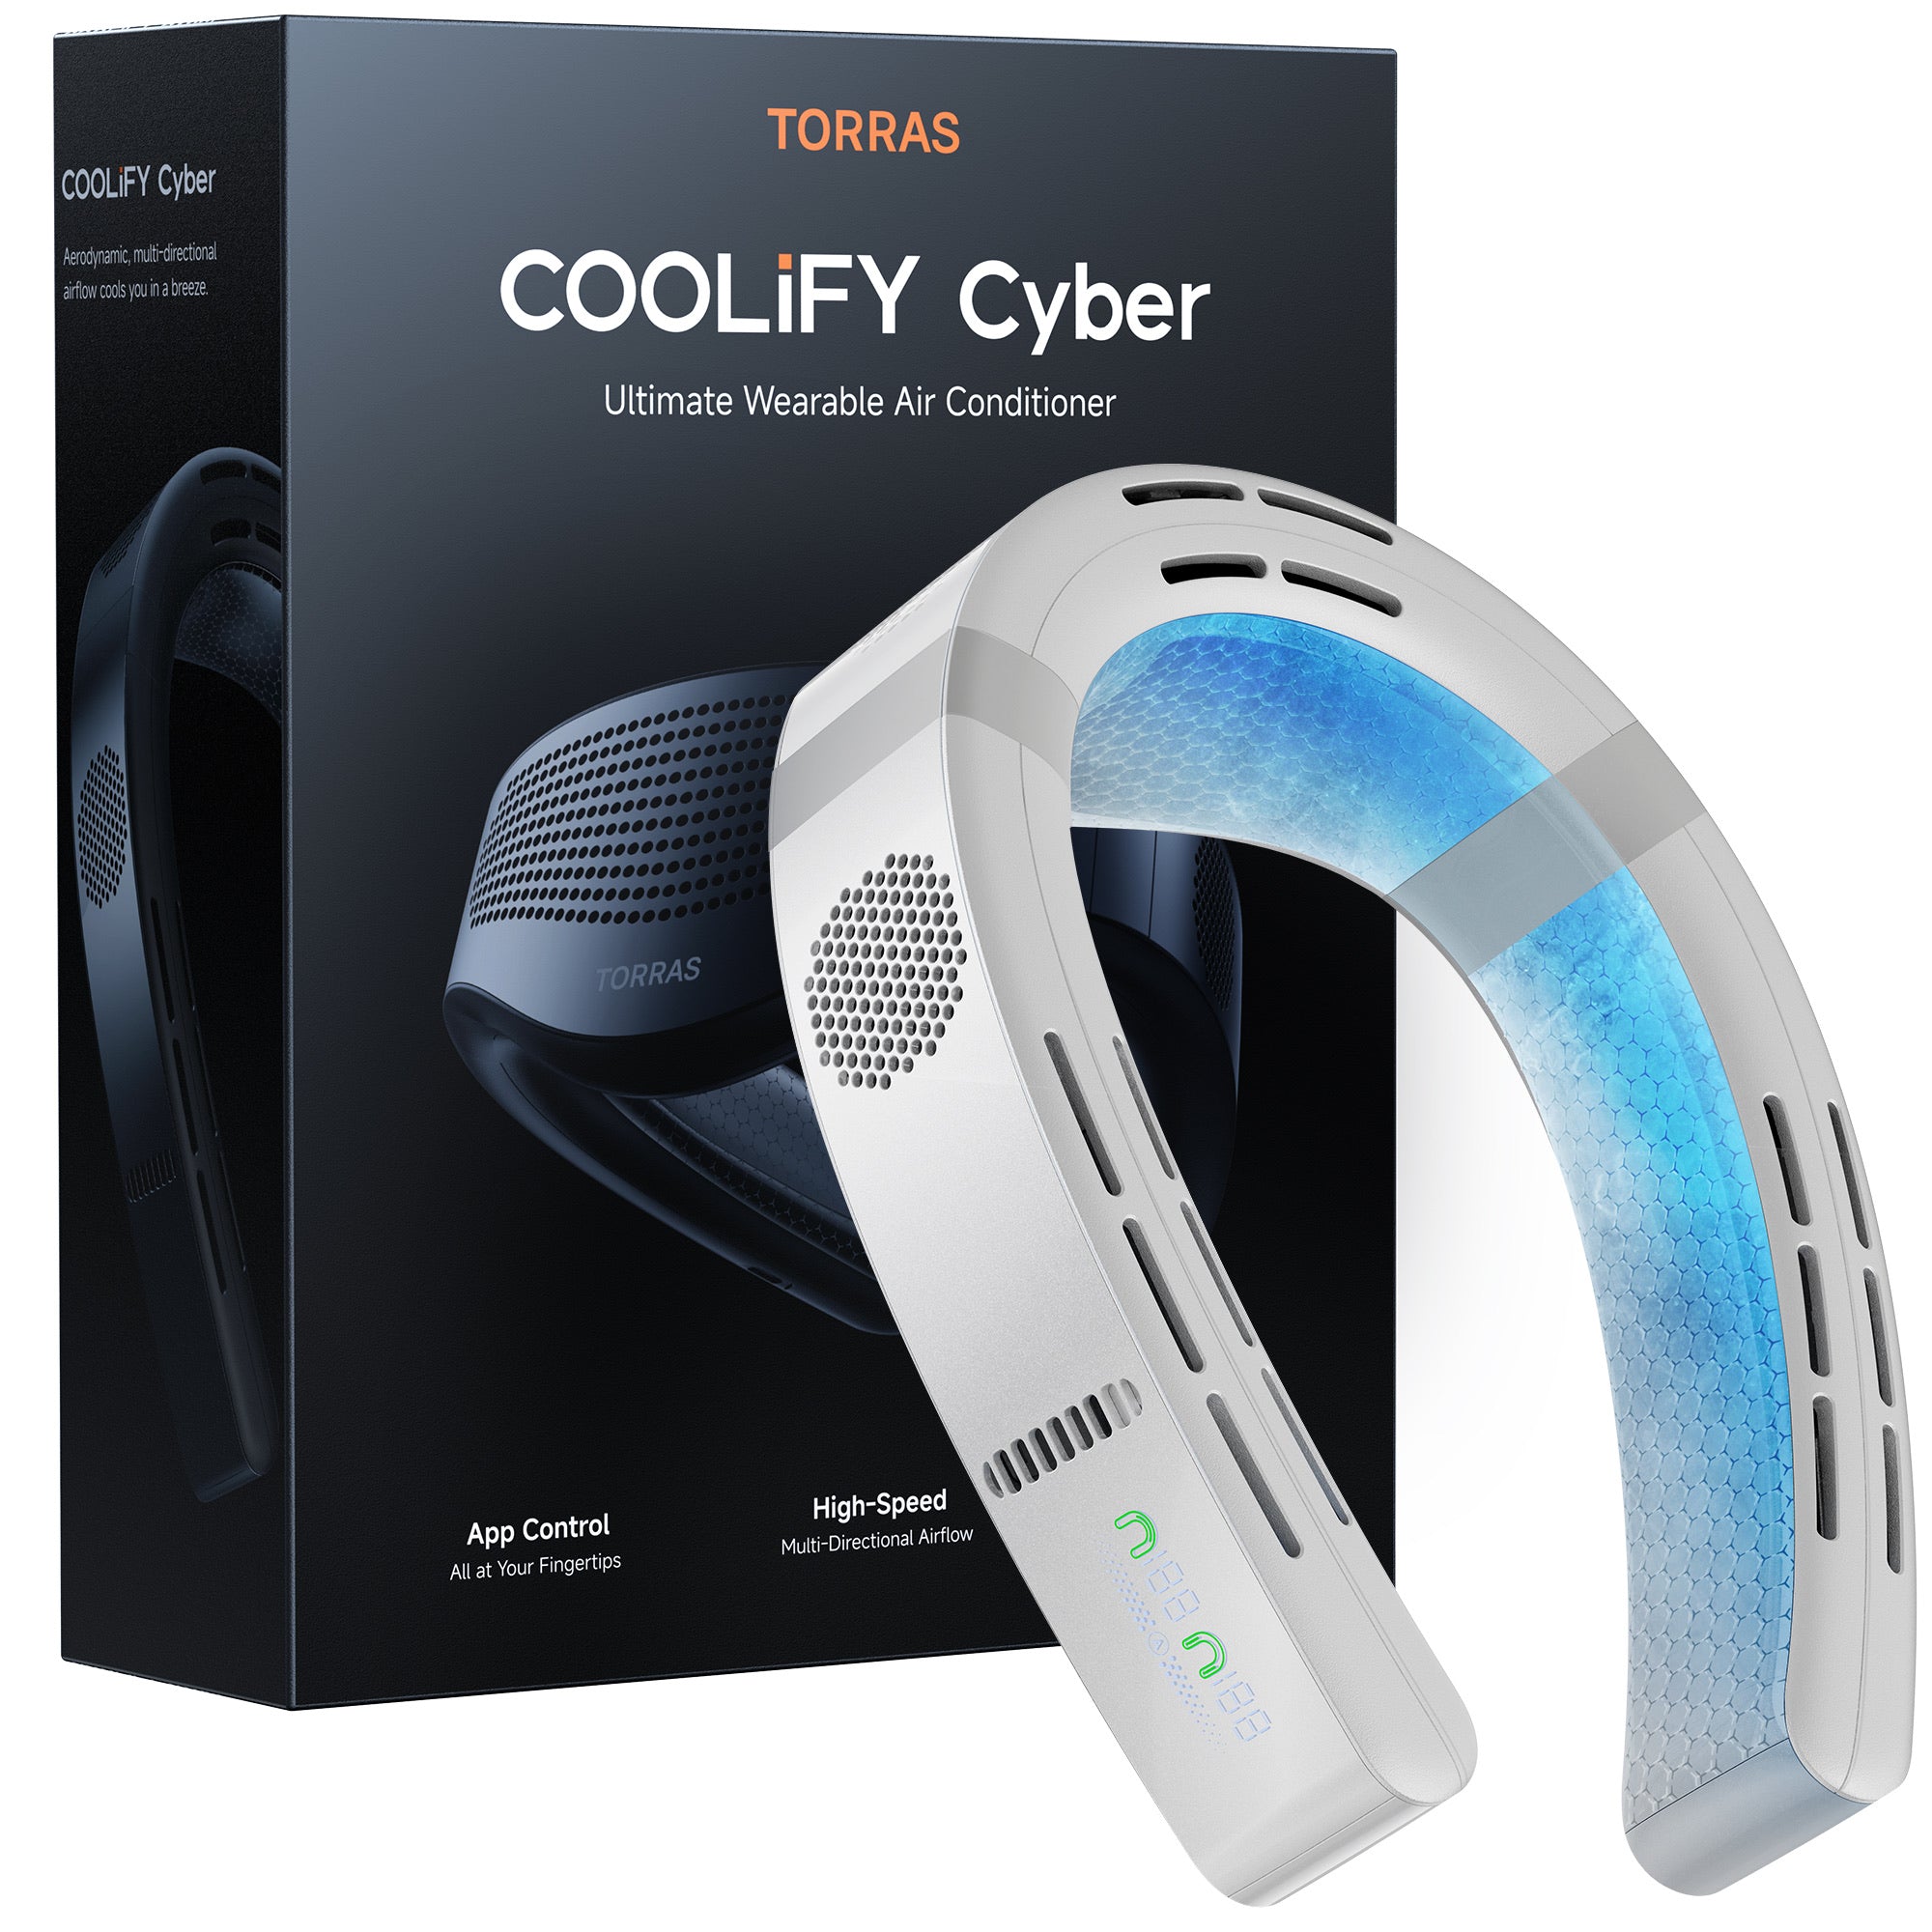 COOLiFY Cyber Portable Air Conditioner | Neck Air Conditioner - TORRAS